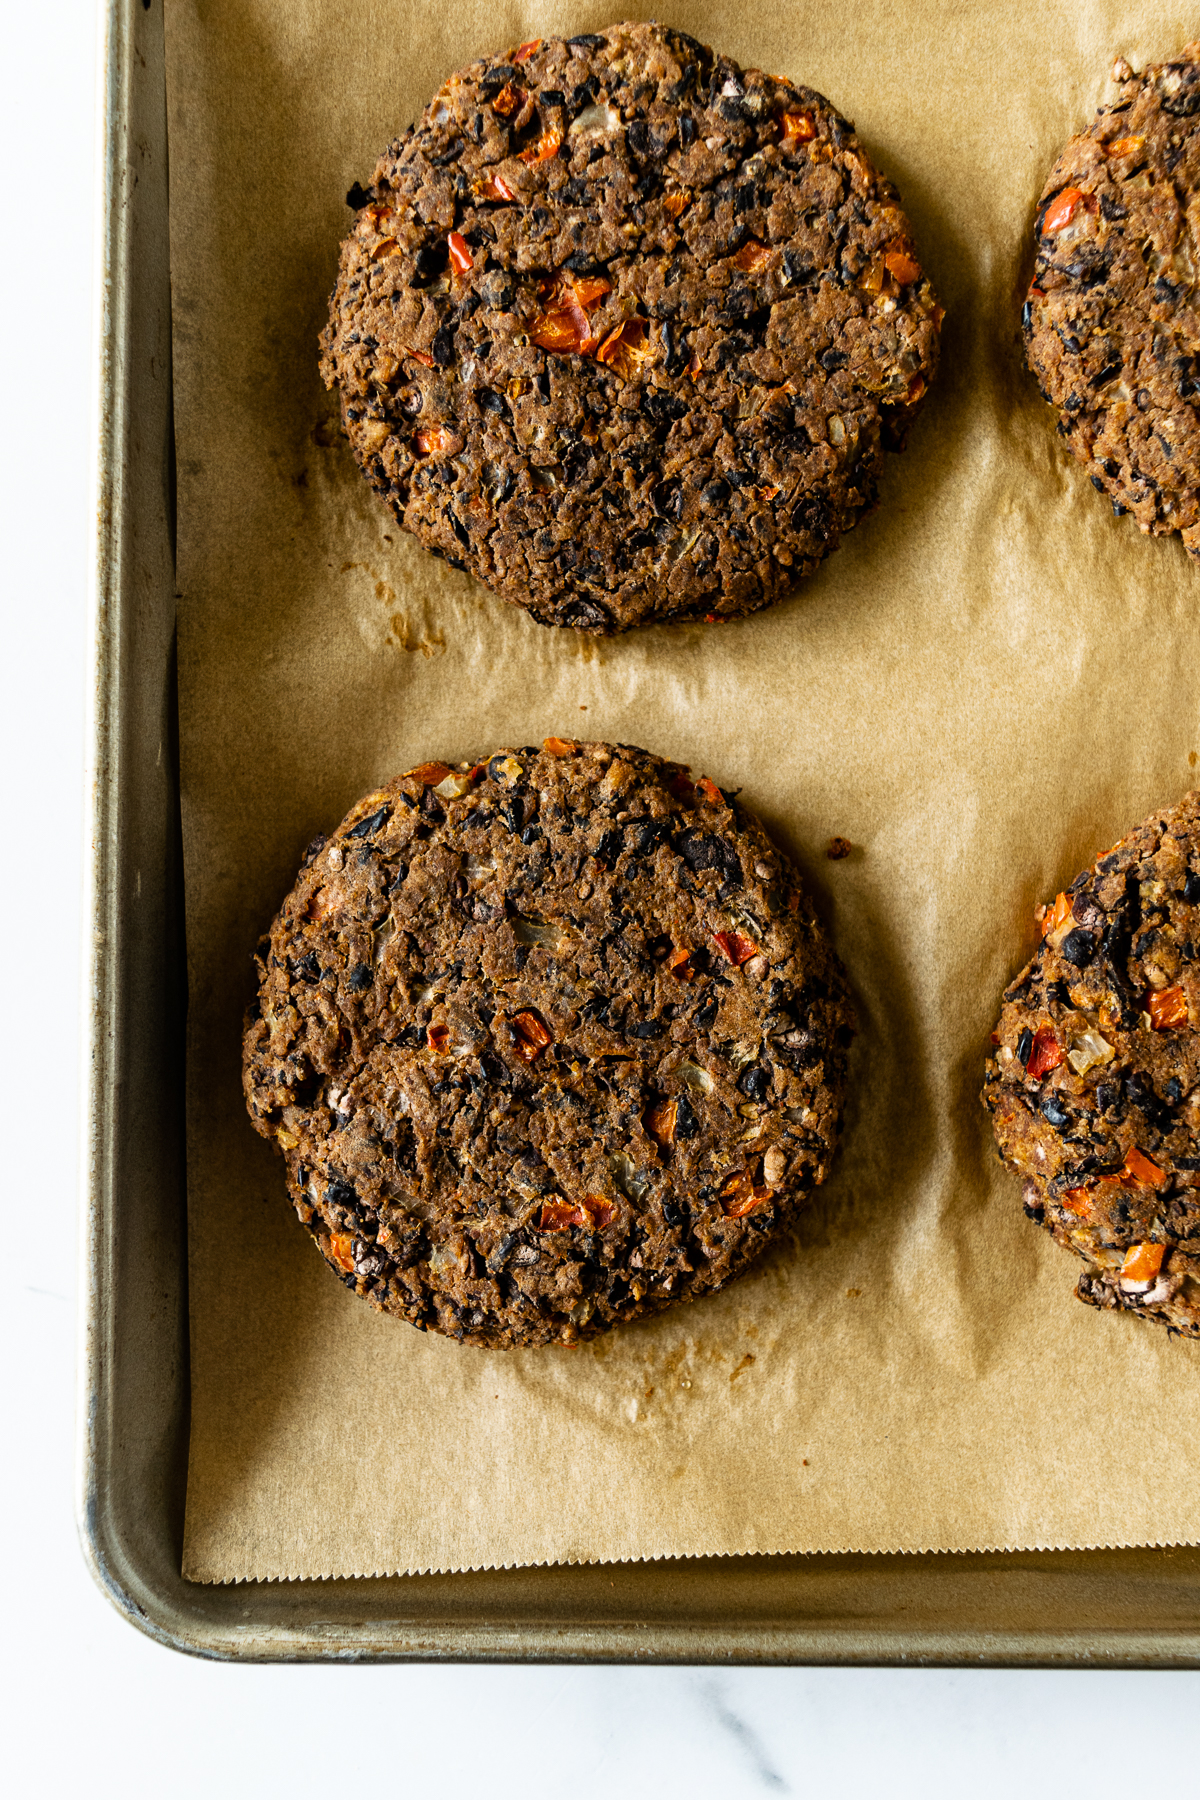 cooked black bean burgers on a baking sheet lined with parchment paper.